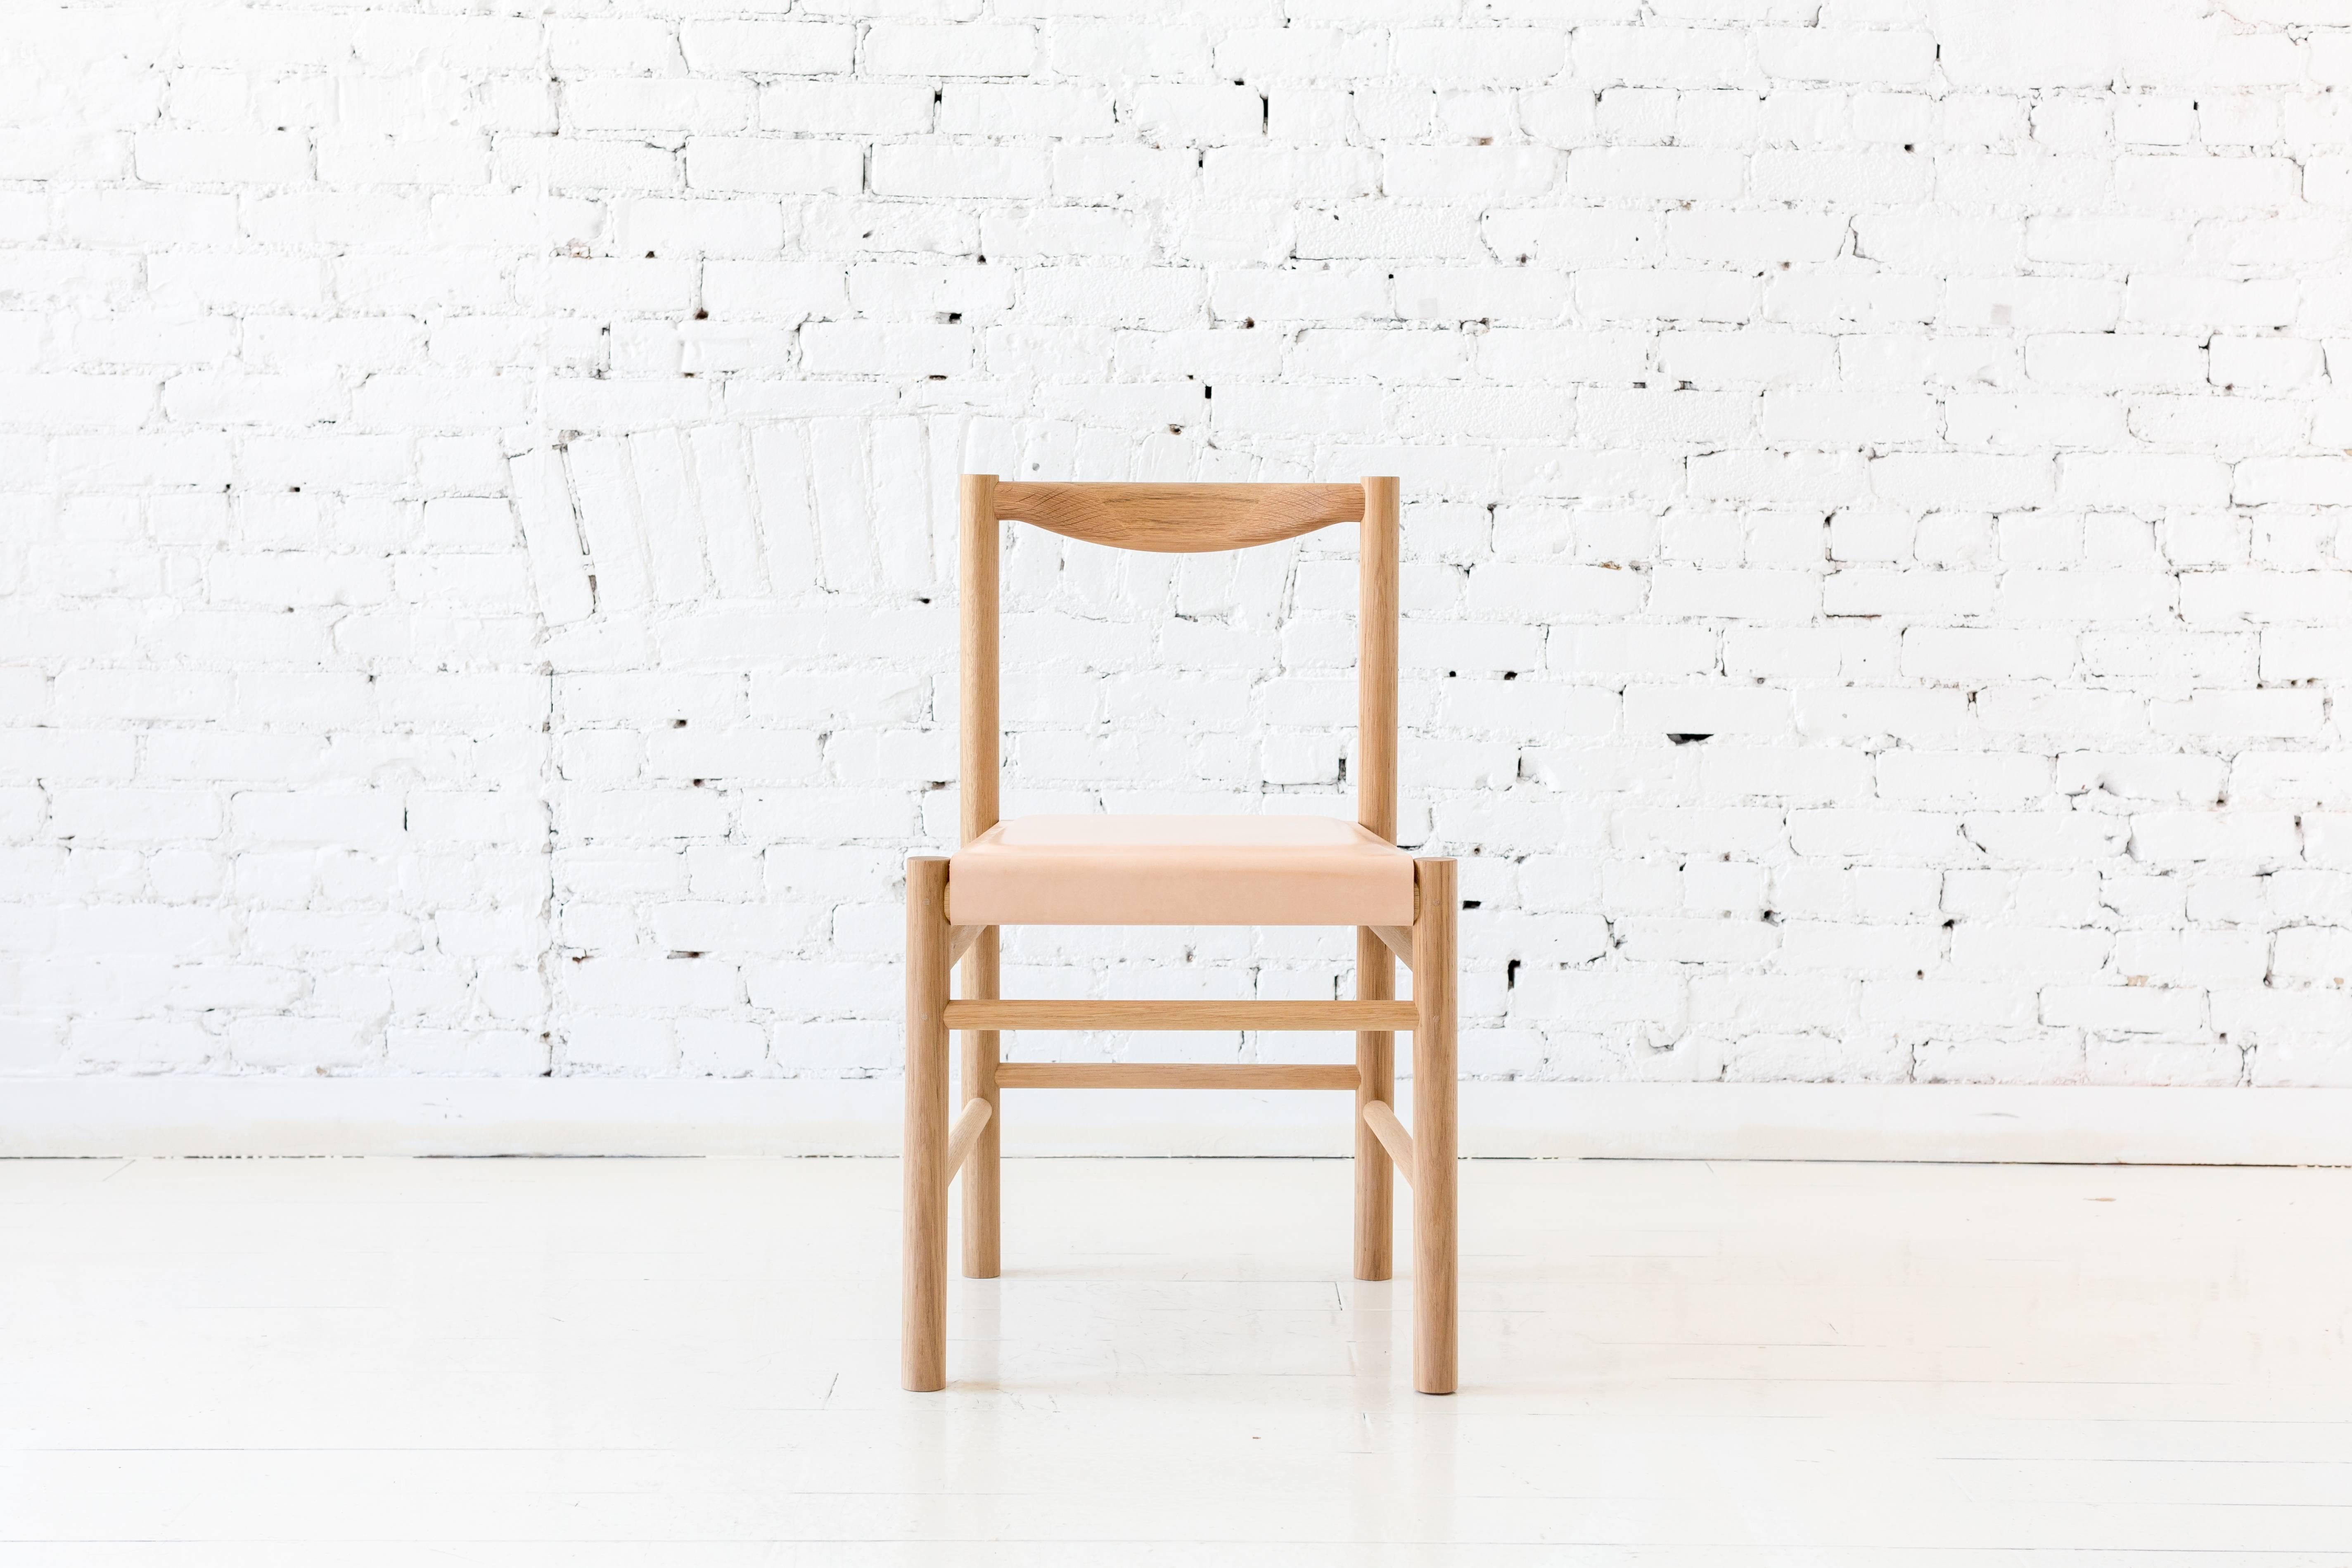 Shaker inspired white oak side chair with comfortable contoured backrest. Wooden seat pan features low profile vegetable tanned leather pad. This chair's simplicity makes it versatile to work perfectly in many different environments.

Shown here:
-